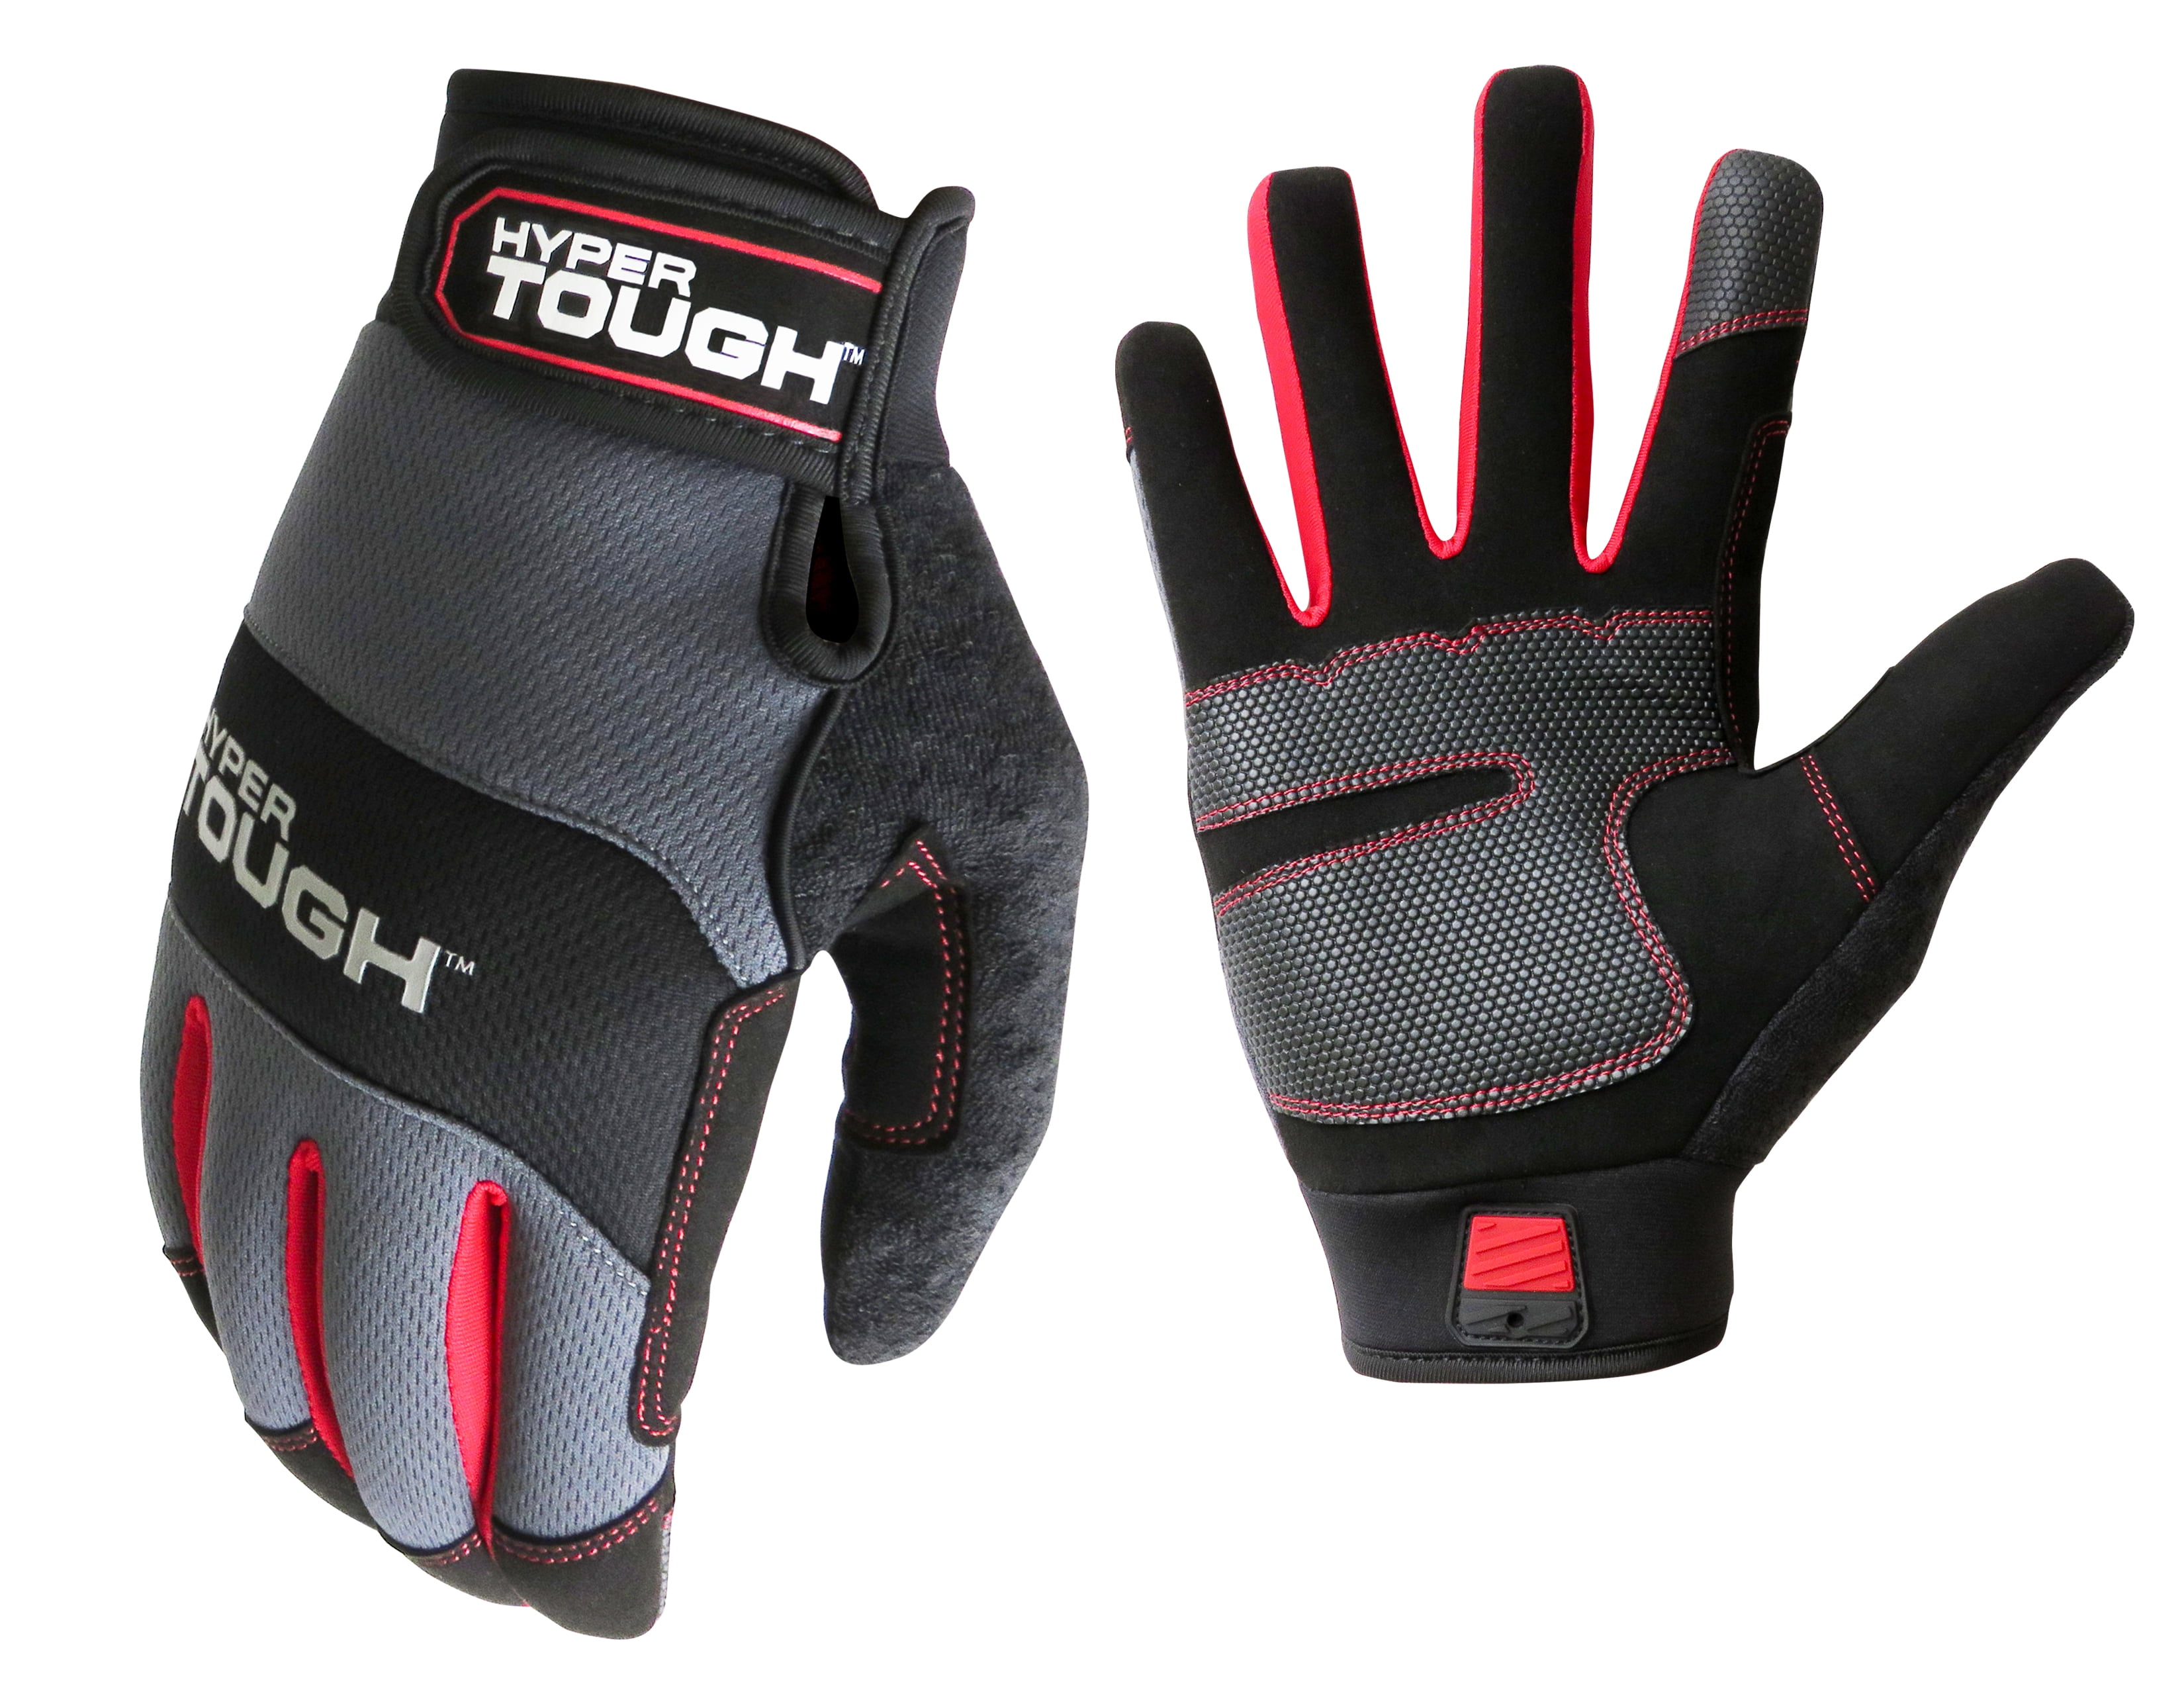 Hyper Tough High Dexterity General Purpose Work Glove, Mesh, Synthetic Leather Palm - Men's Large, Size: Men'Small Large